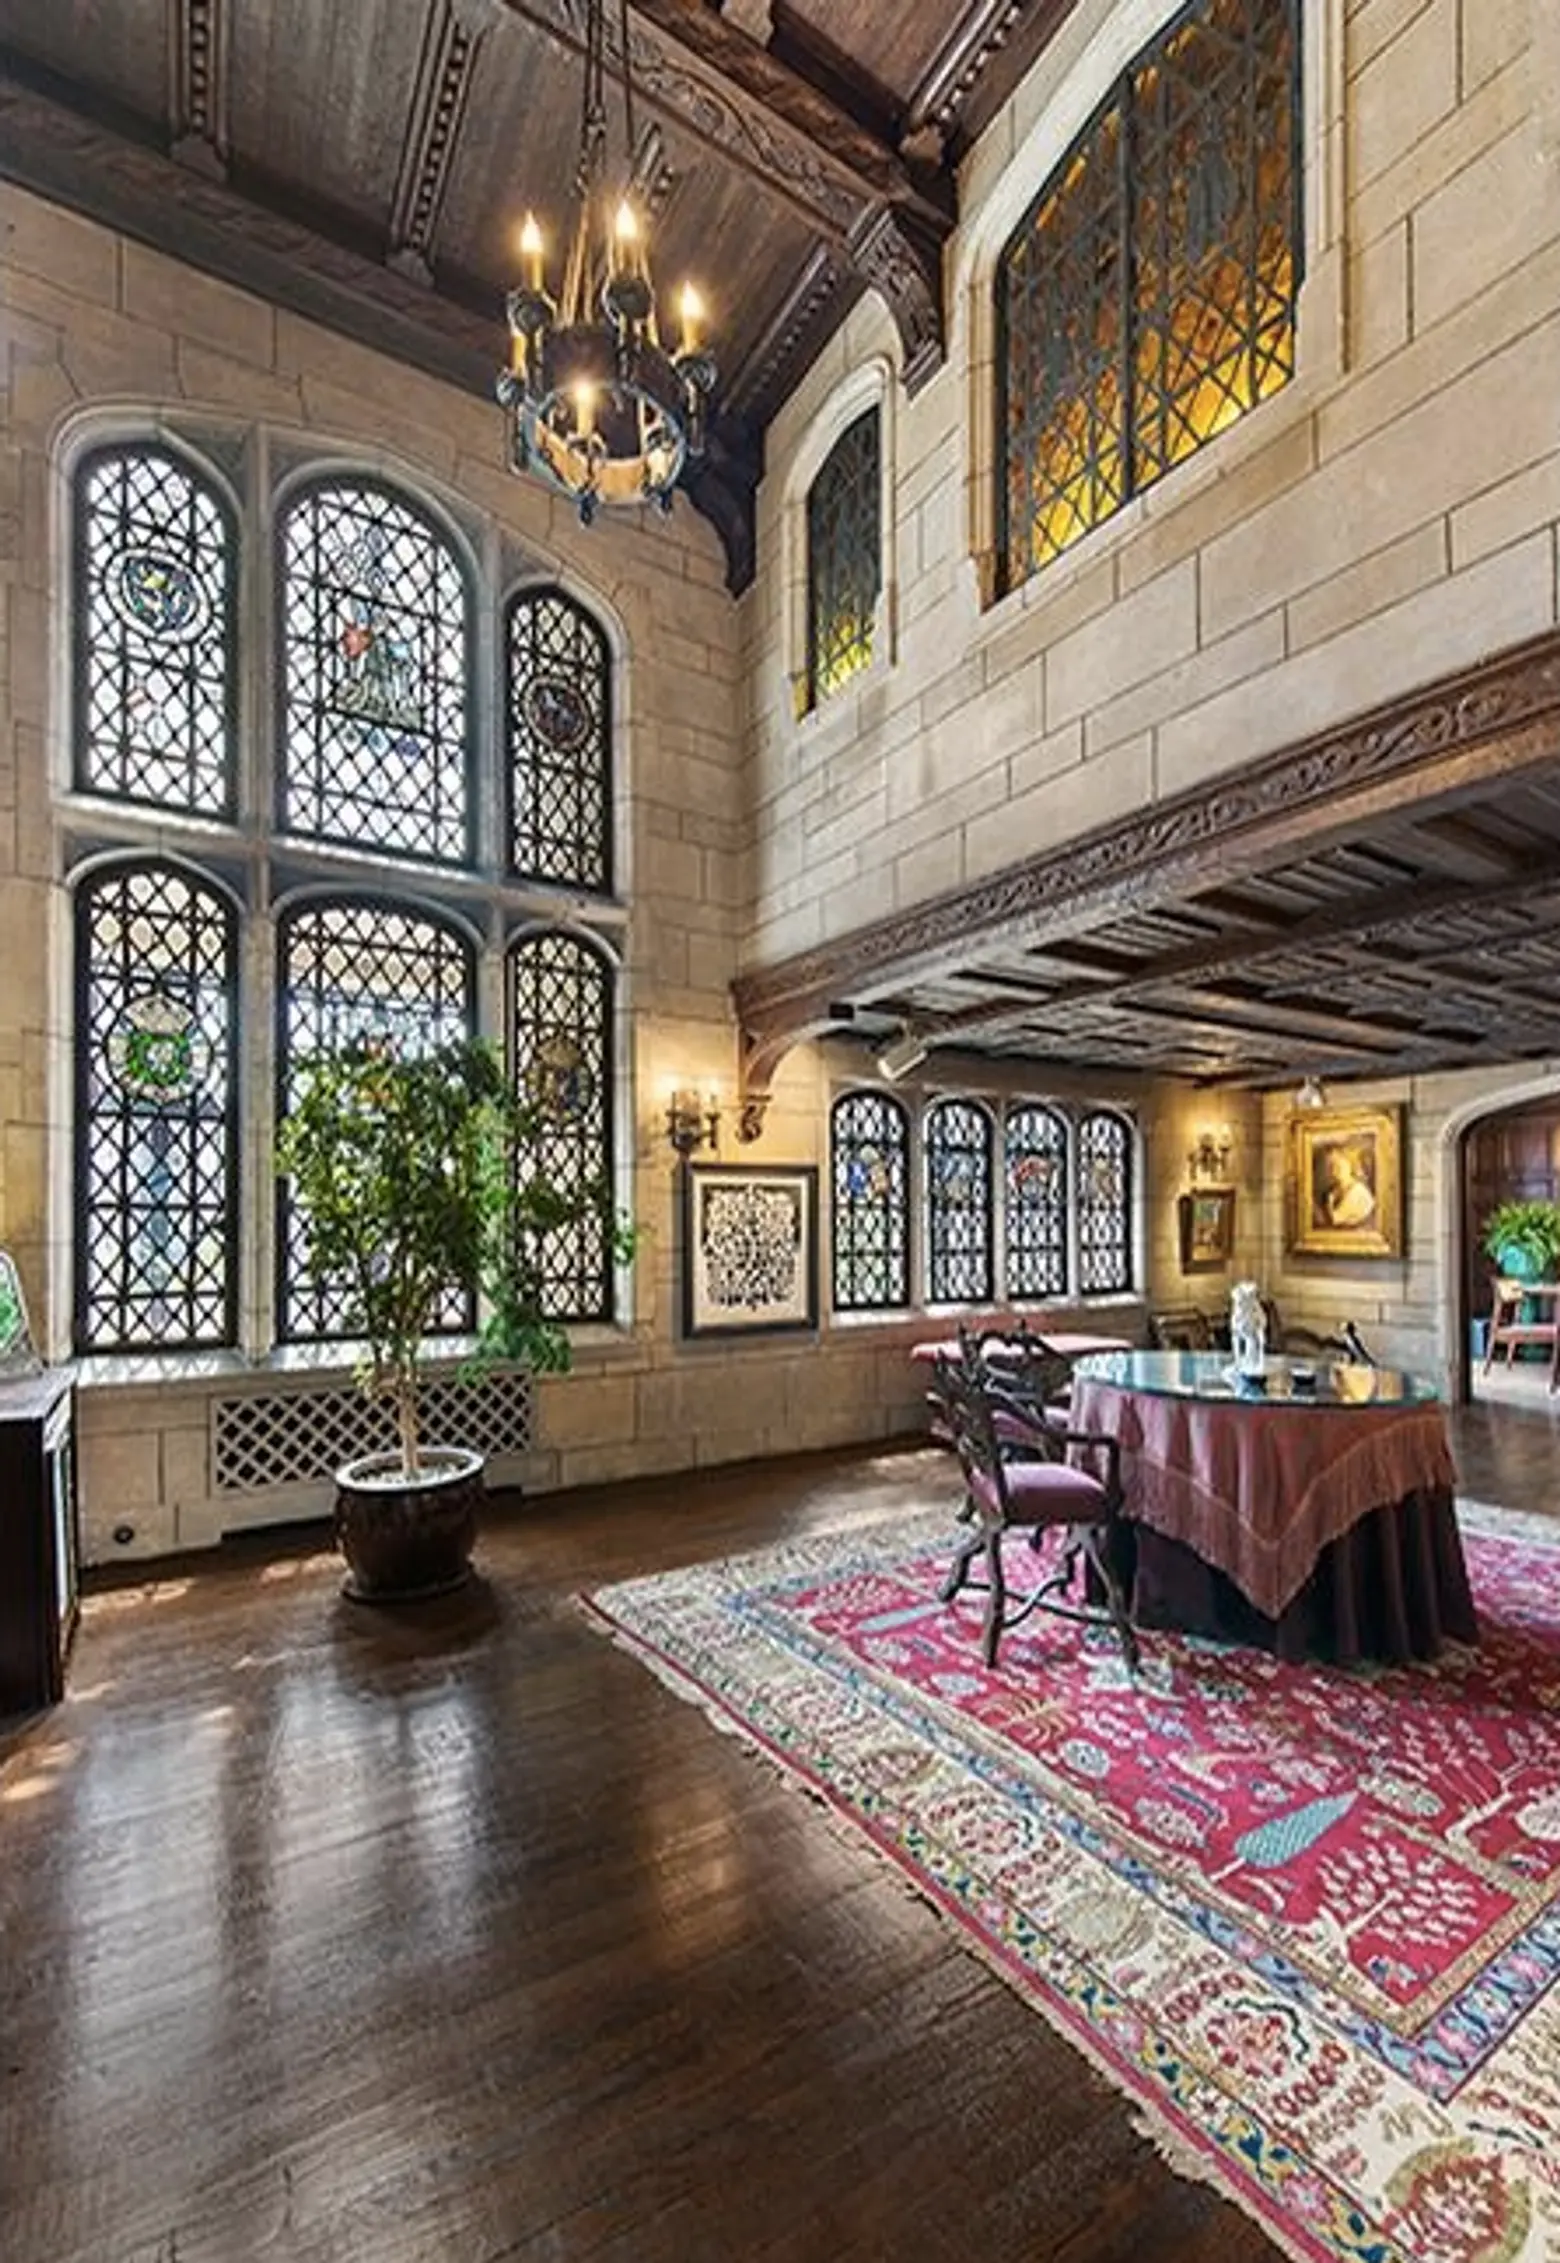 This $6.25 Million Medieval-Style Home Is Located in Manhattan